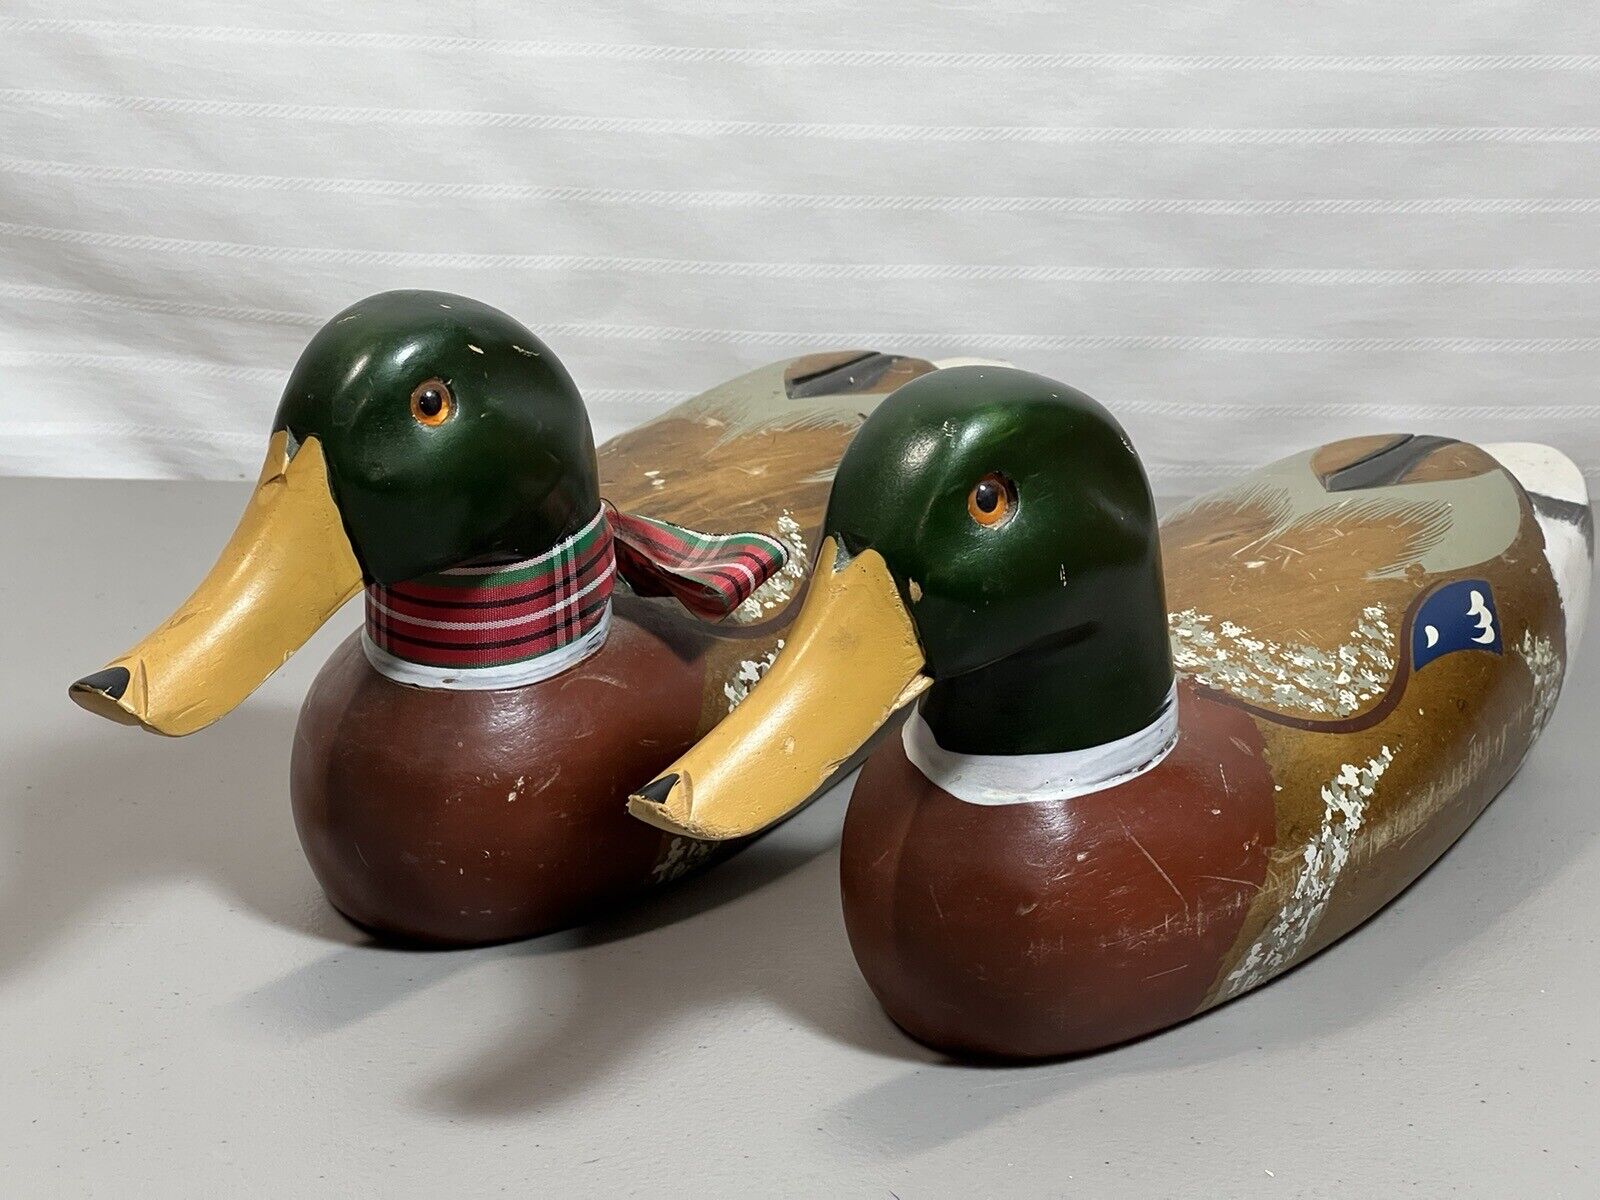 Vintage Long Wood Duck Carving EMSON Hand Painted Decor-Made in Taiwan R.O.C.